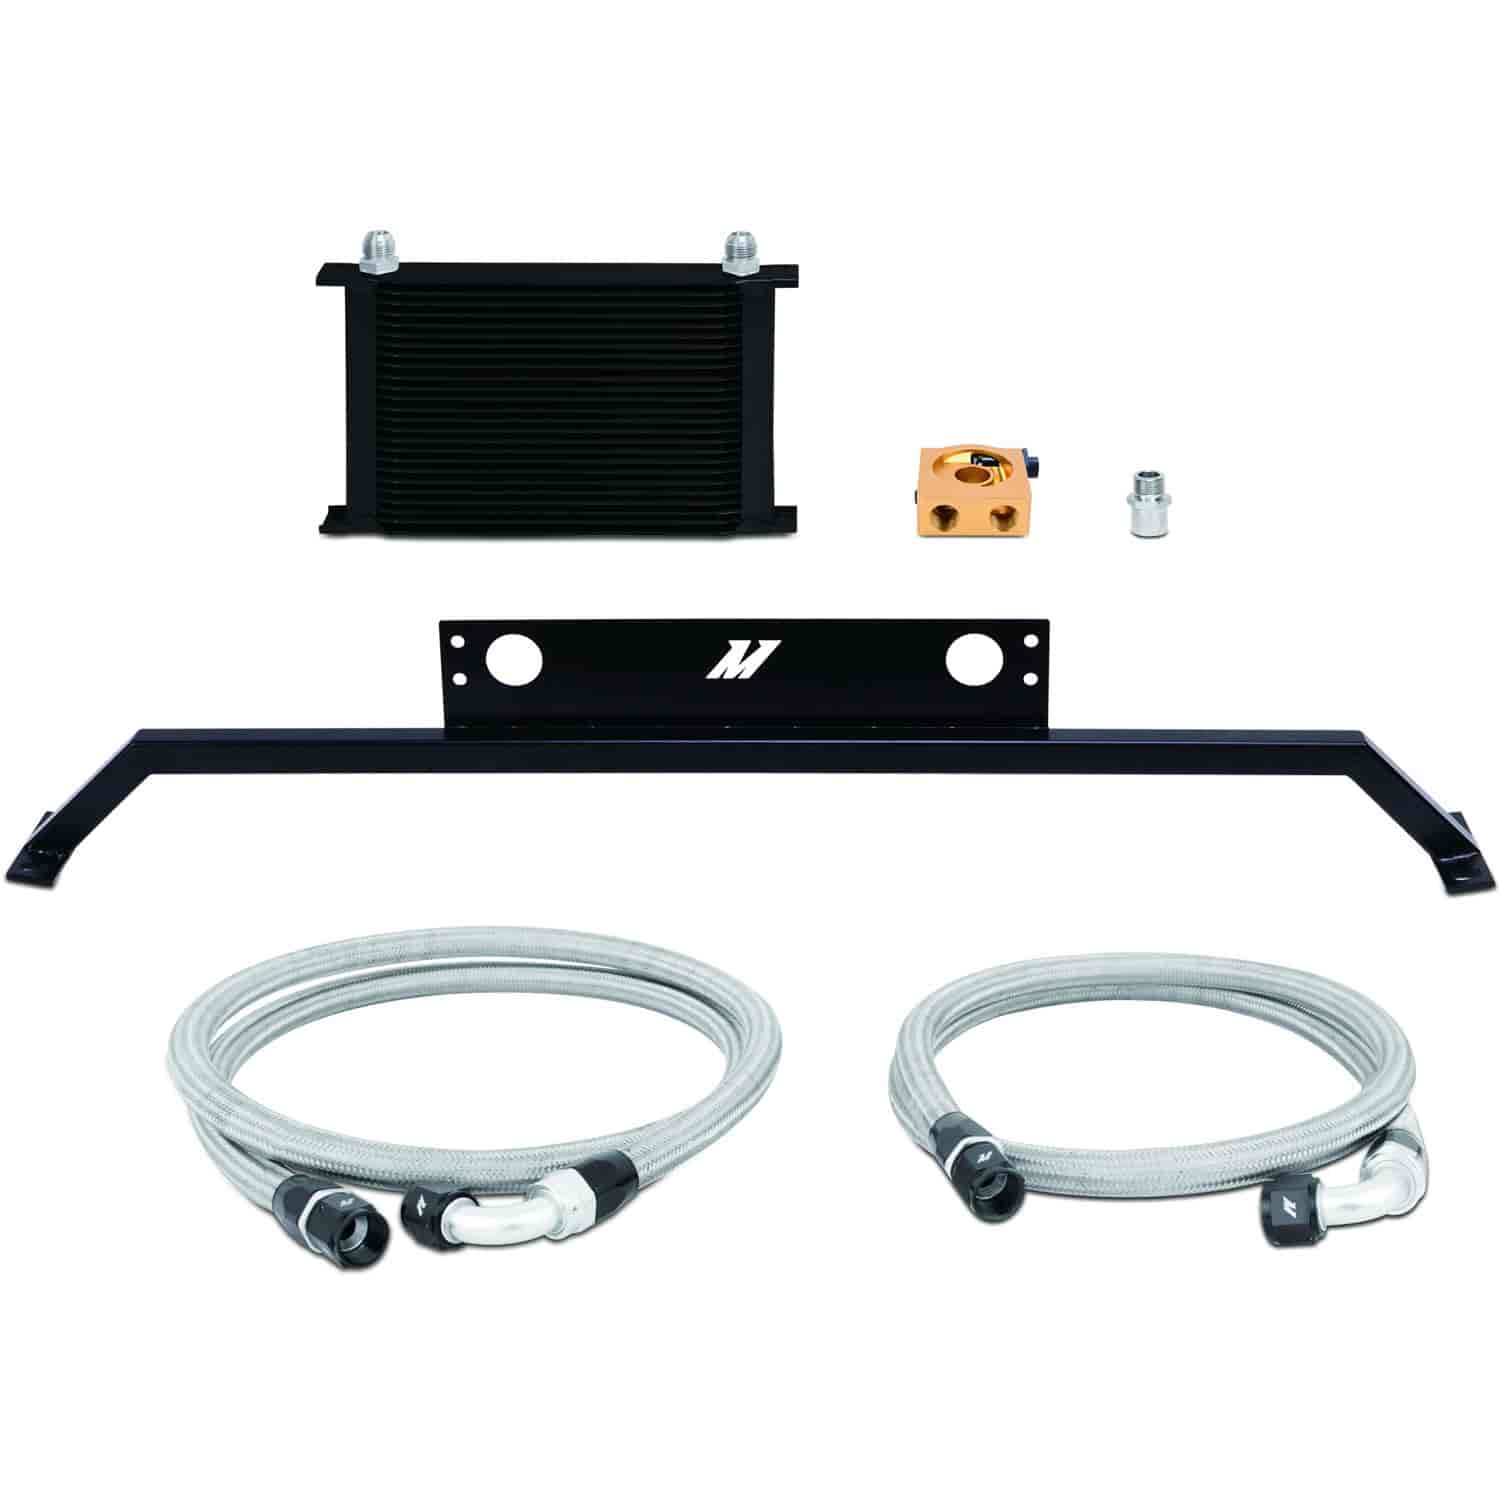 Ford Mustang 5.0L Oil Cooler Kit - MFG Part No. MMOC-MUS-11TBK